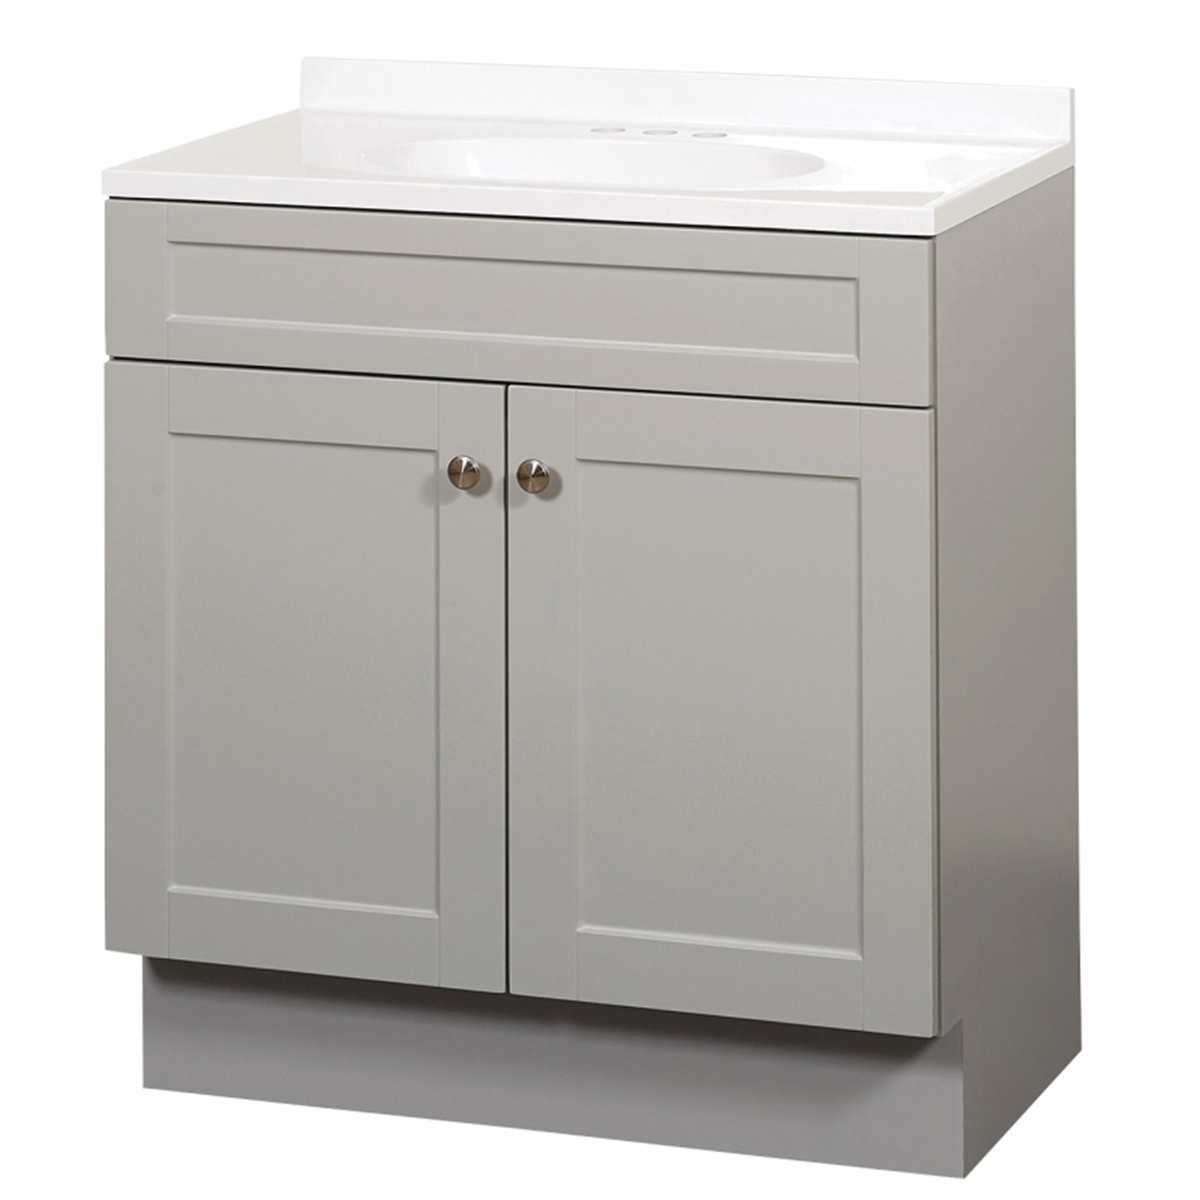 Zenna Home SBC36GY 2-Door Shaker Vanity with Top, Wood, Cool Gray, Cultured Marble Sink, White Sink, 1/EA